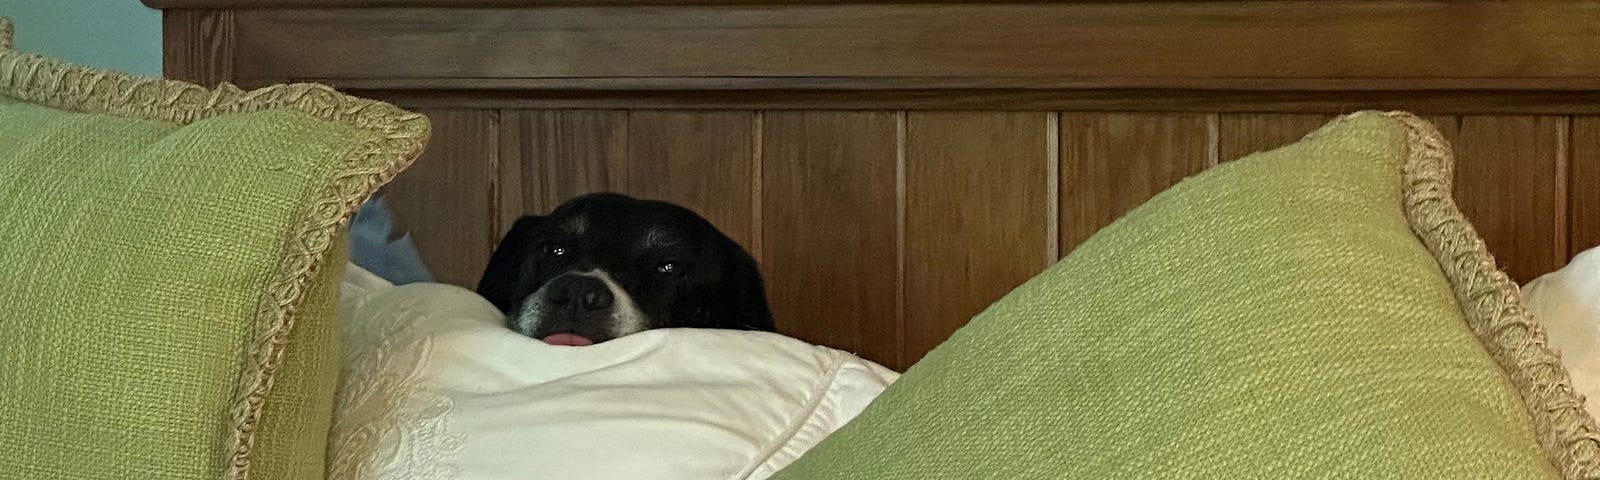 Dog peering over pillows in bed.